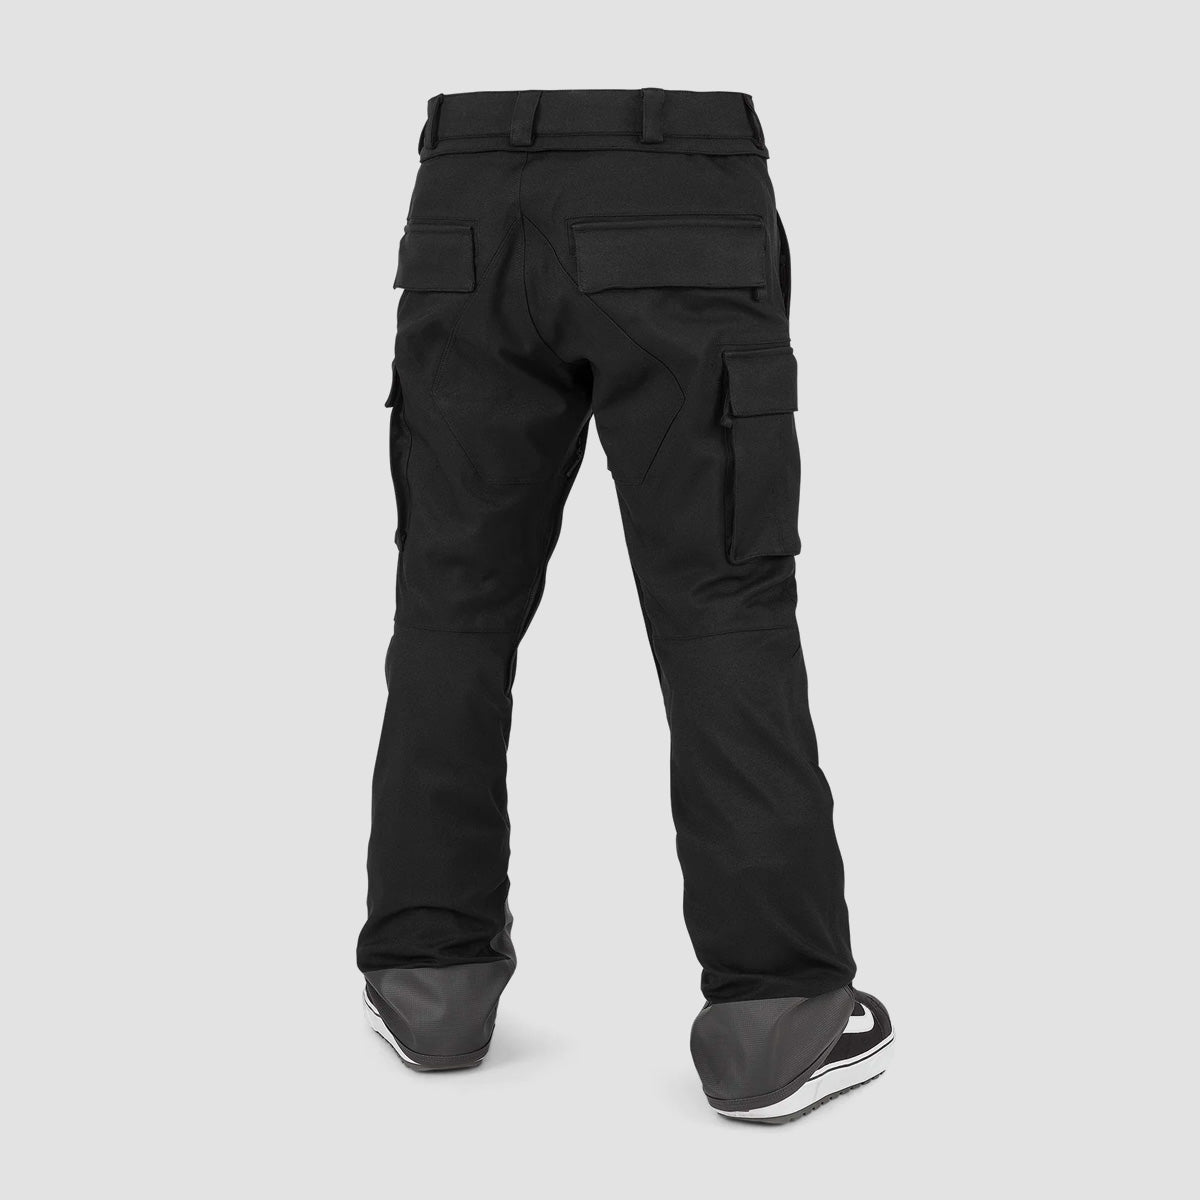 Volcom New Articulated Snow Pants Black